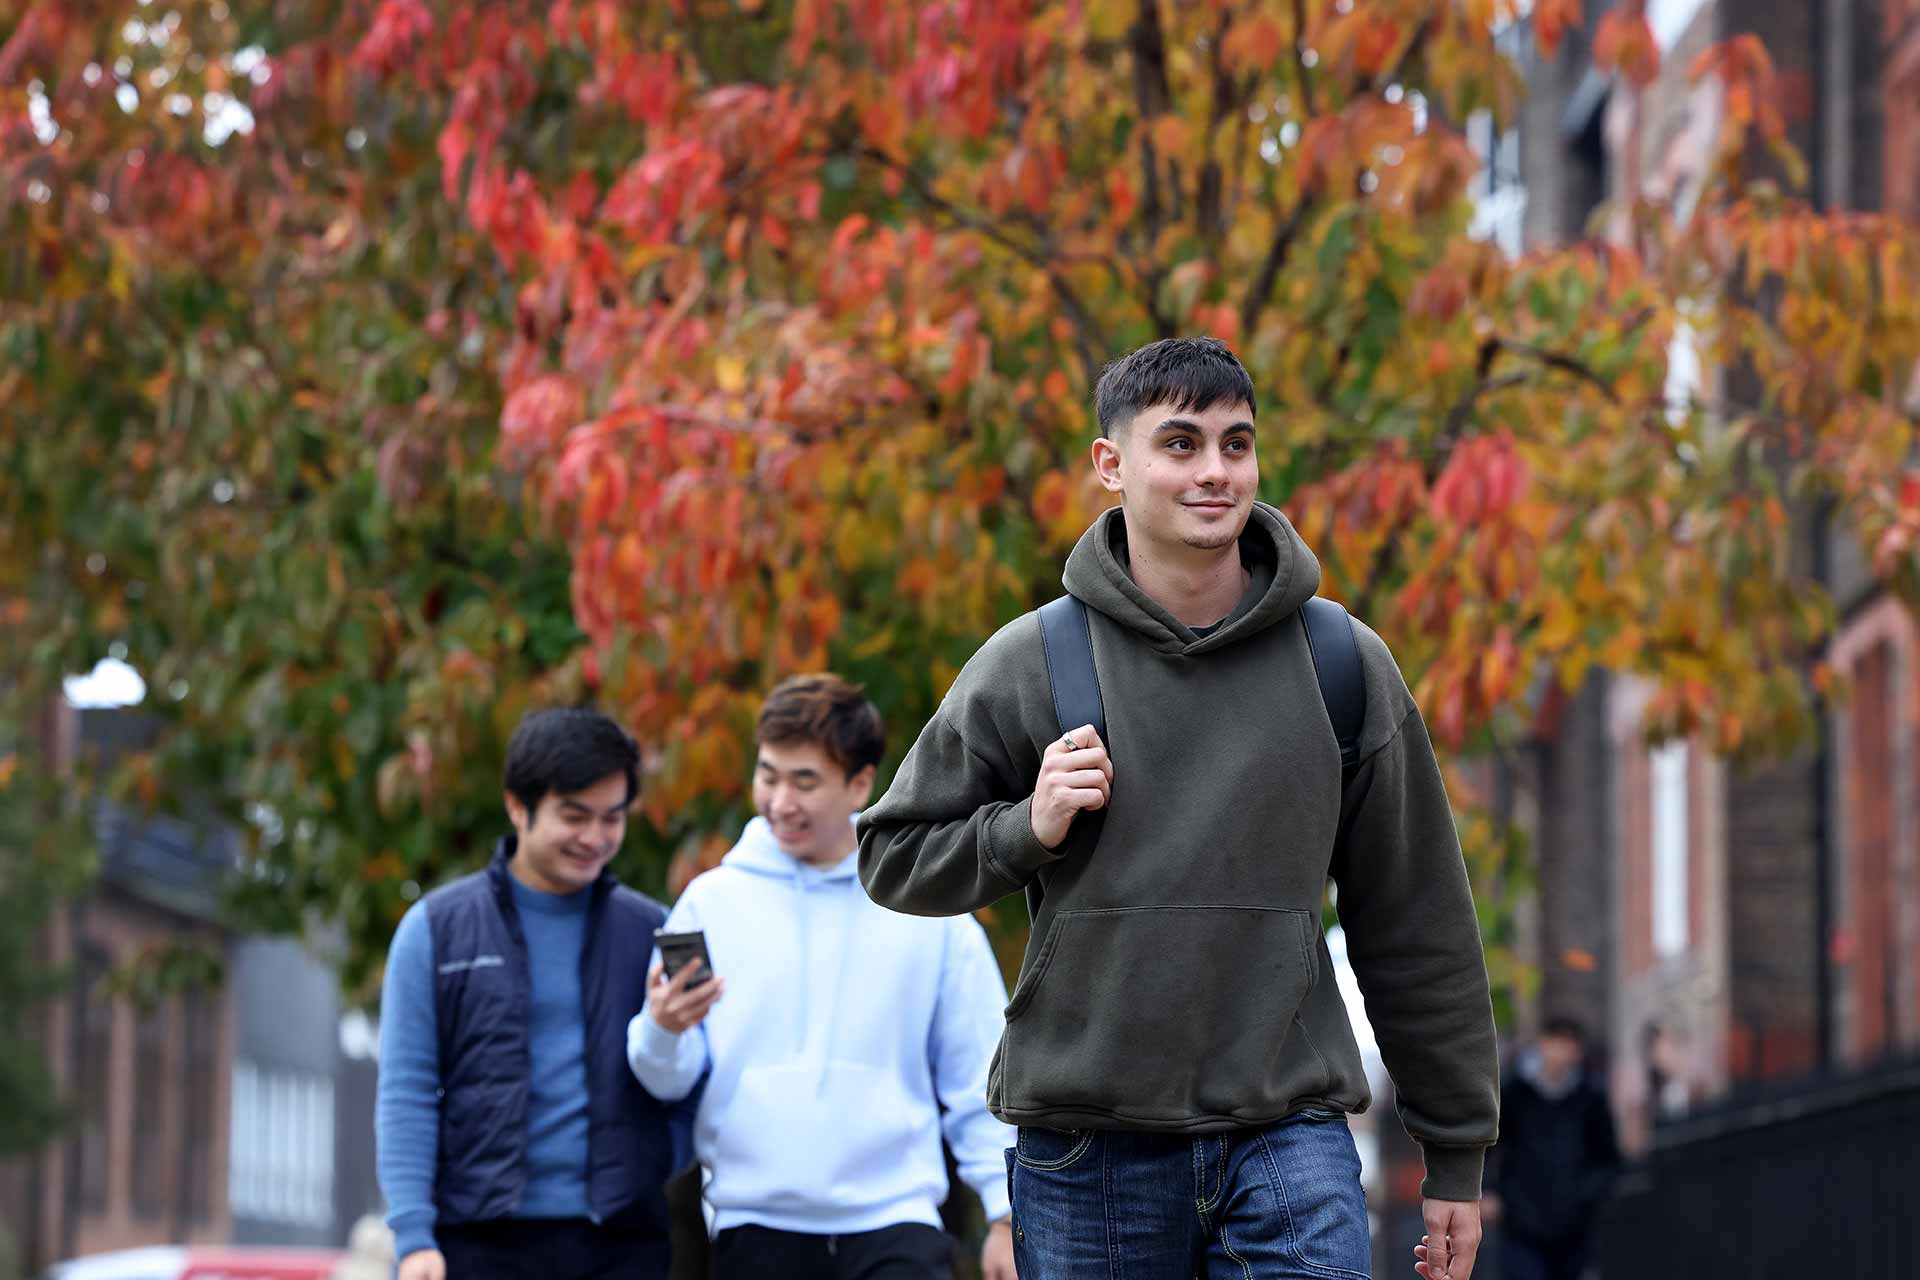 A student walks through the University of Liverpool campus, with two other students in the background